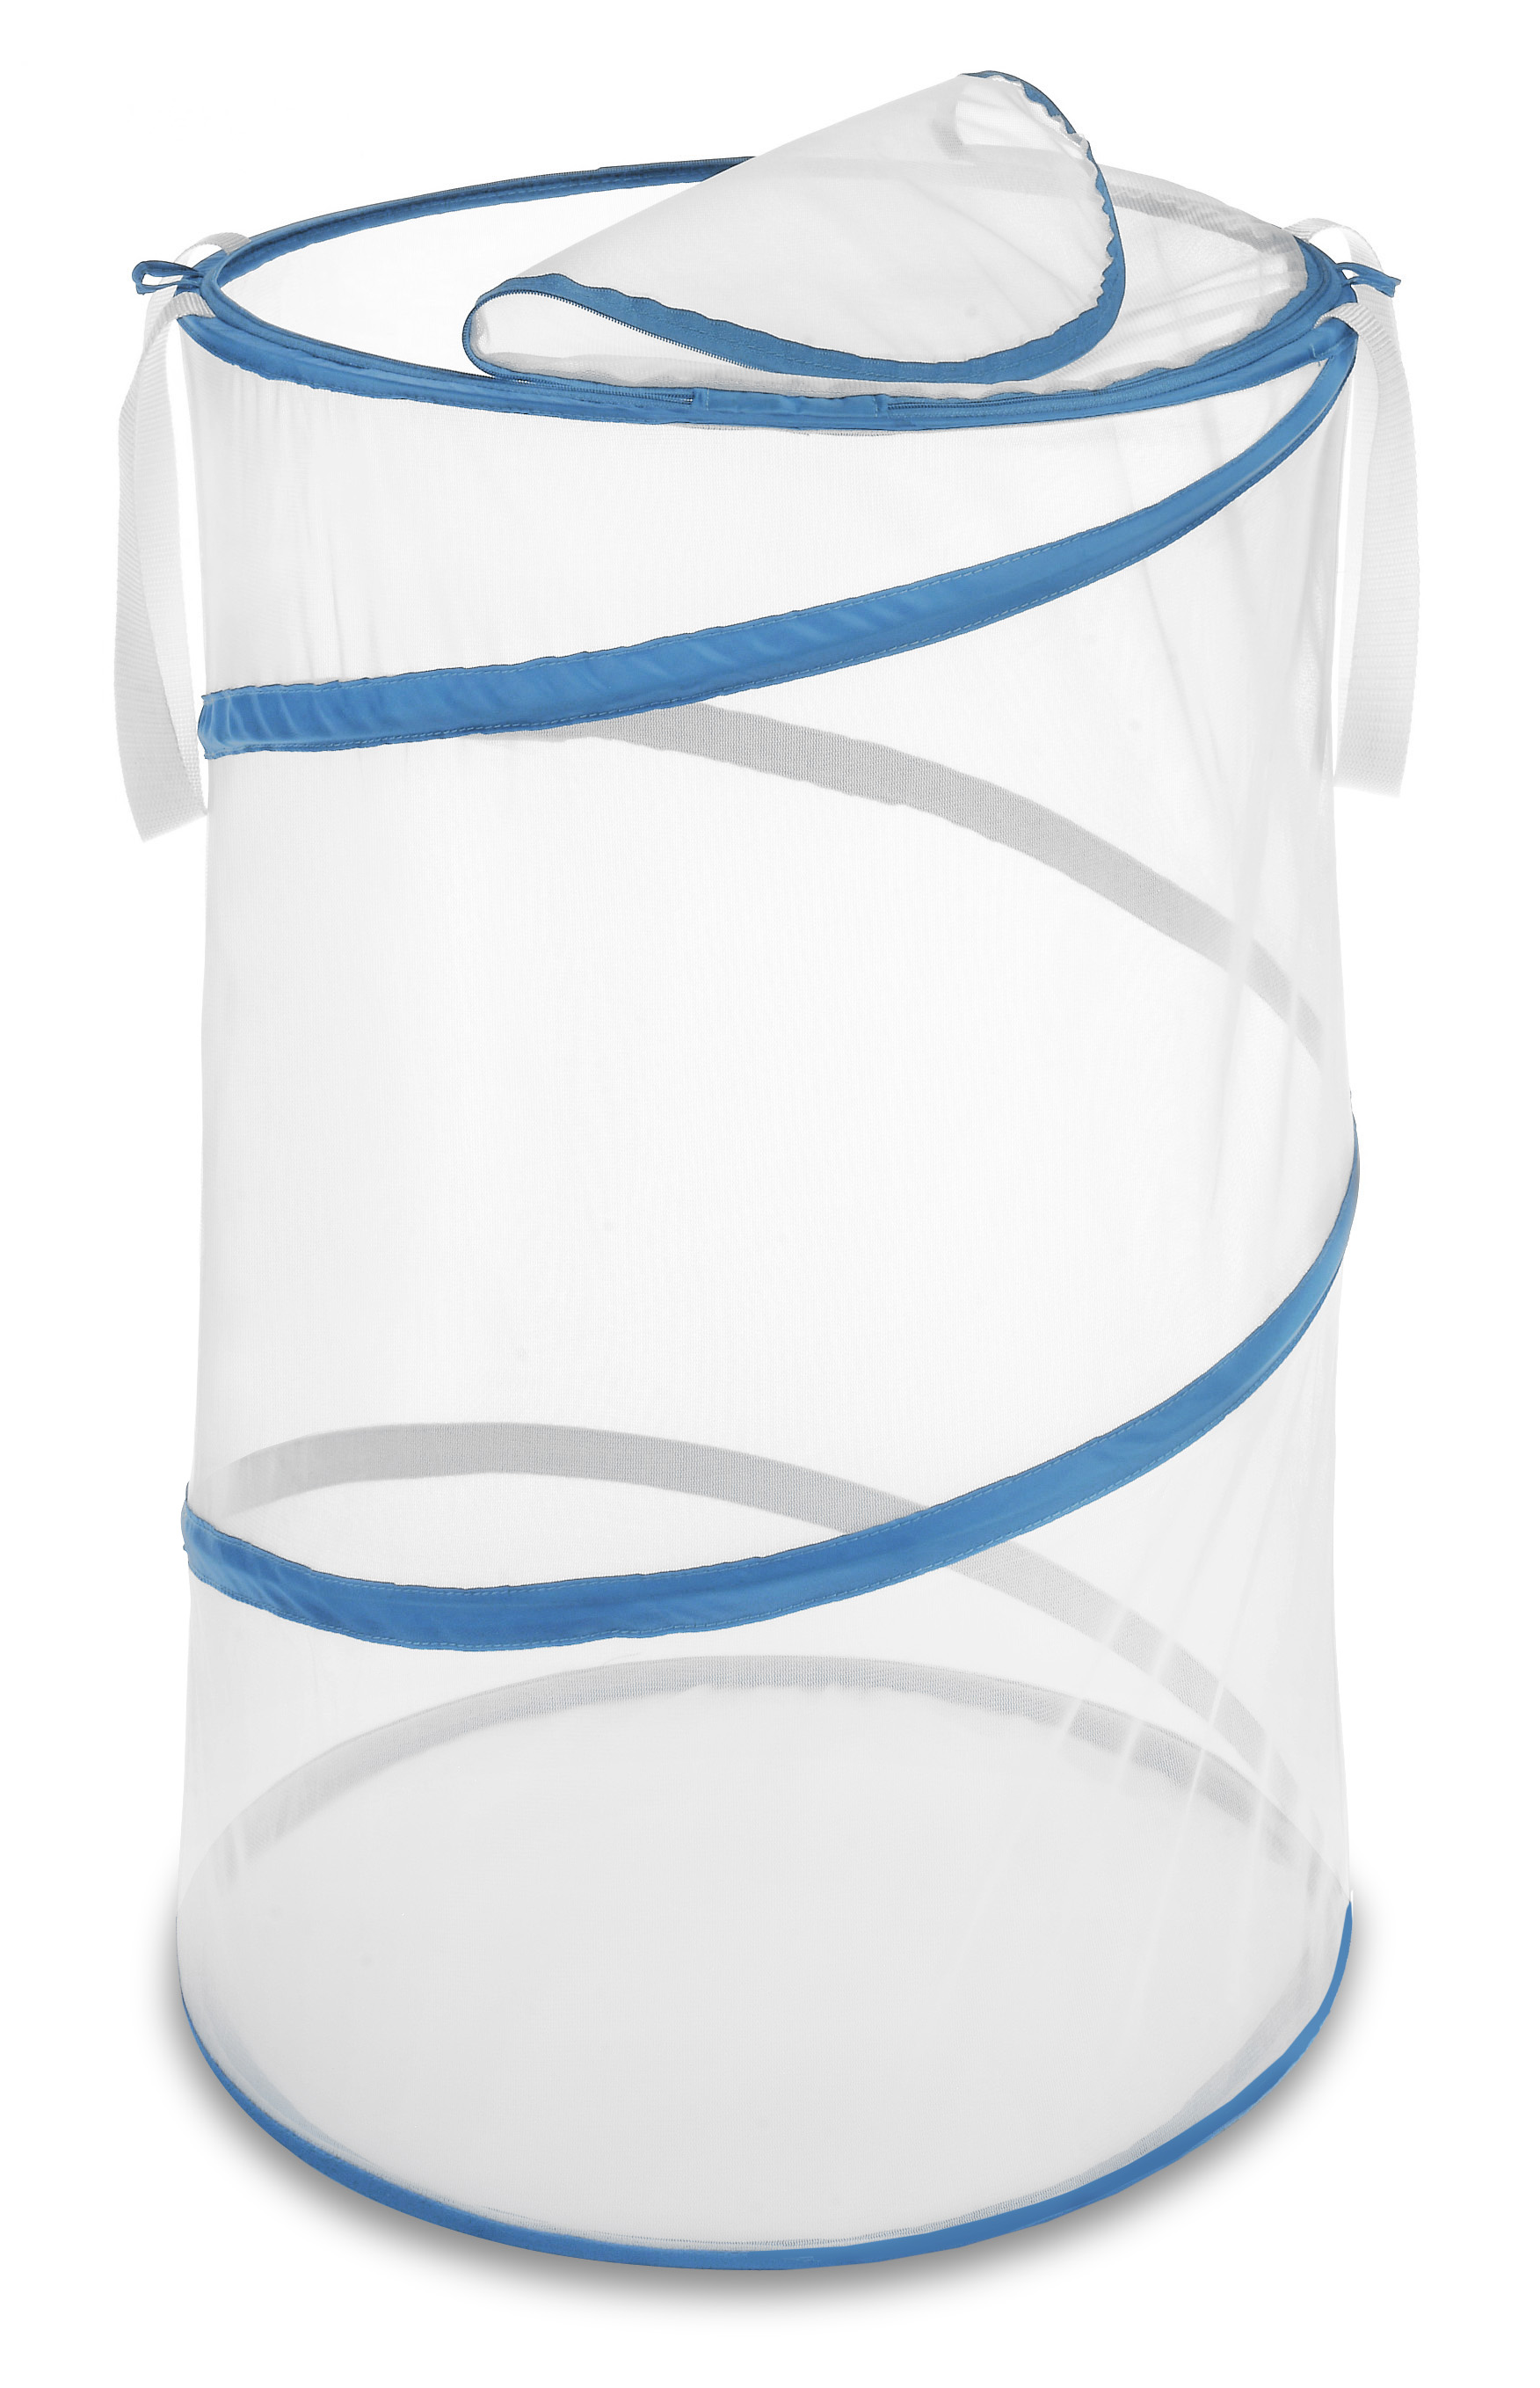 Whitmor Zippered Collapsible Laundry Hamper, Blue and White - image 1 of 7